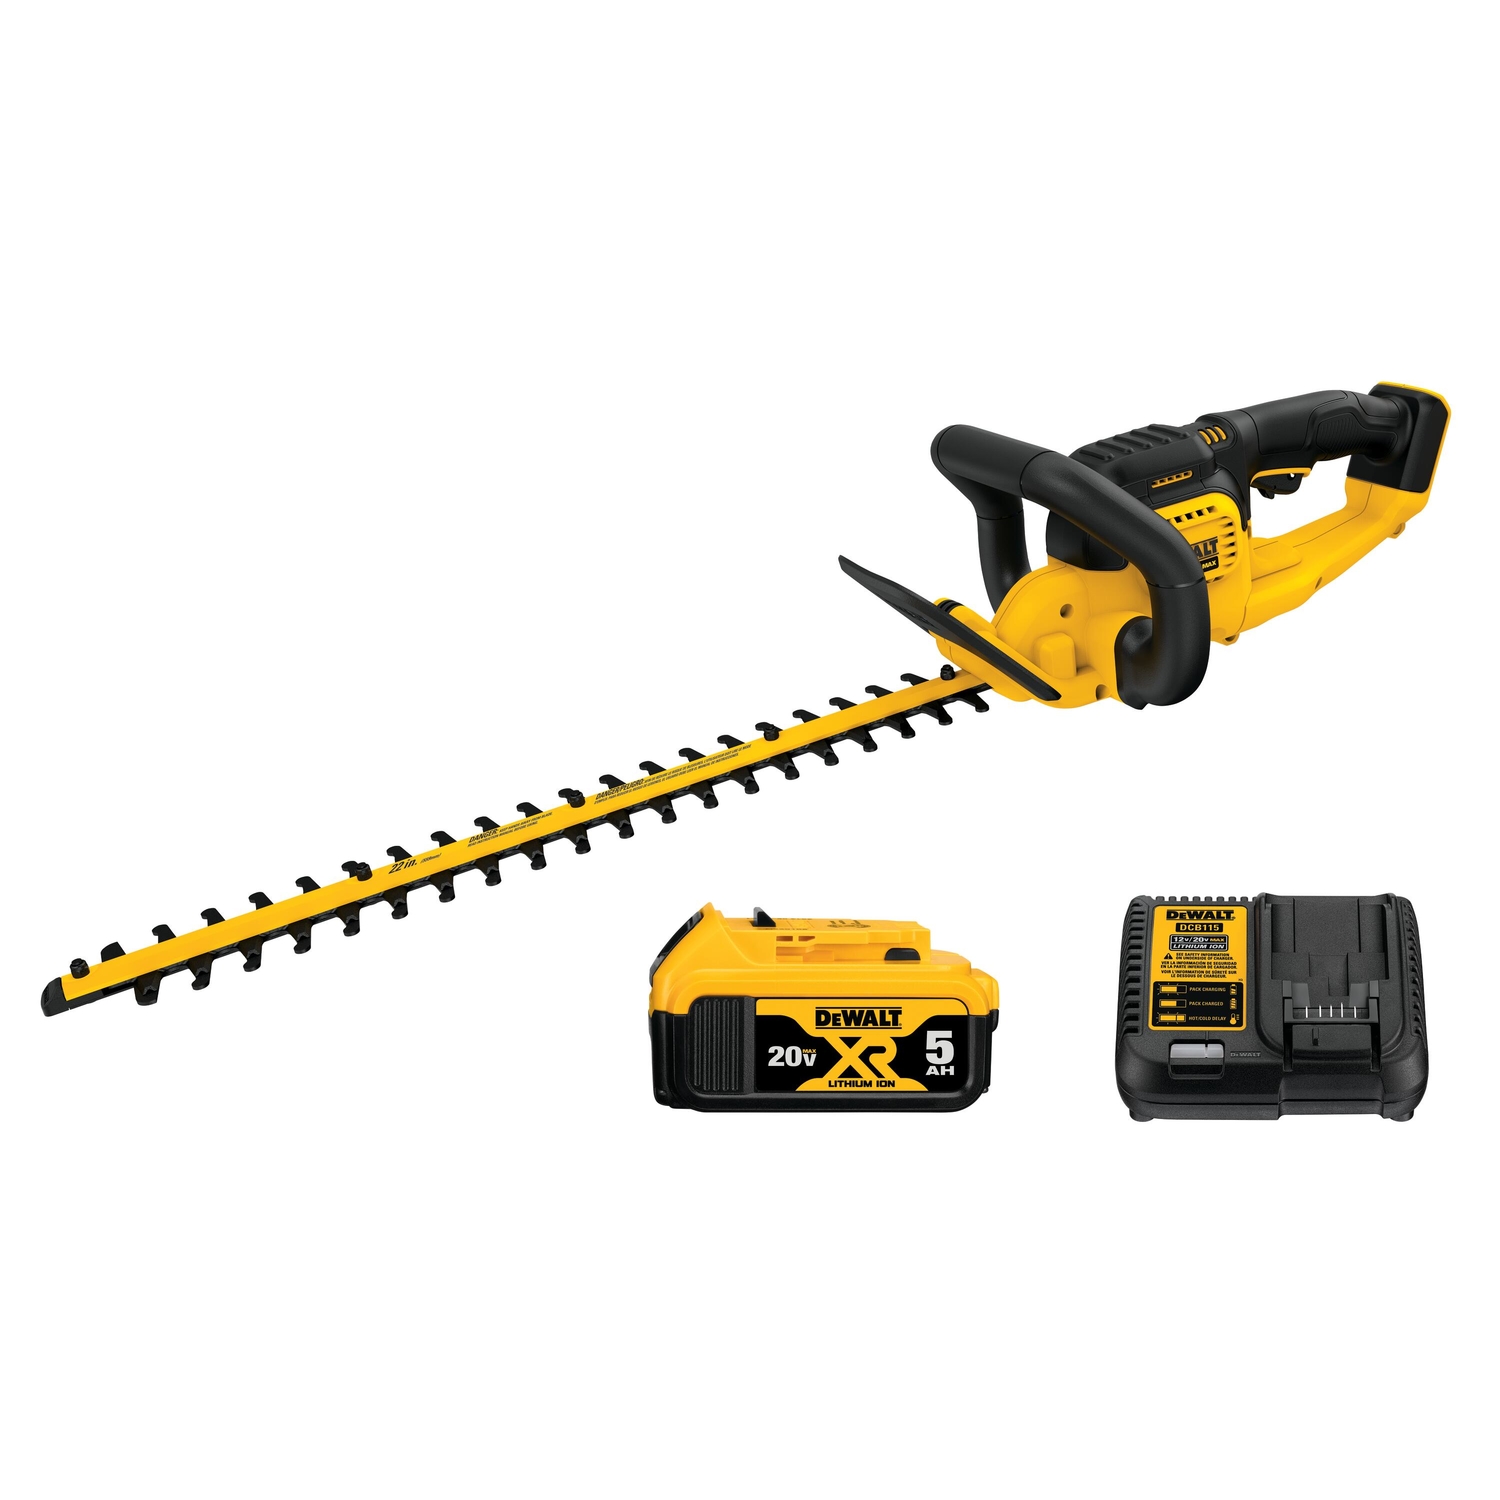 homebase electric hedge trimmer